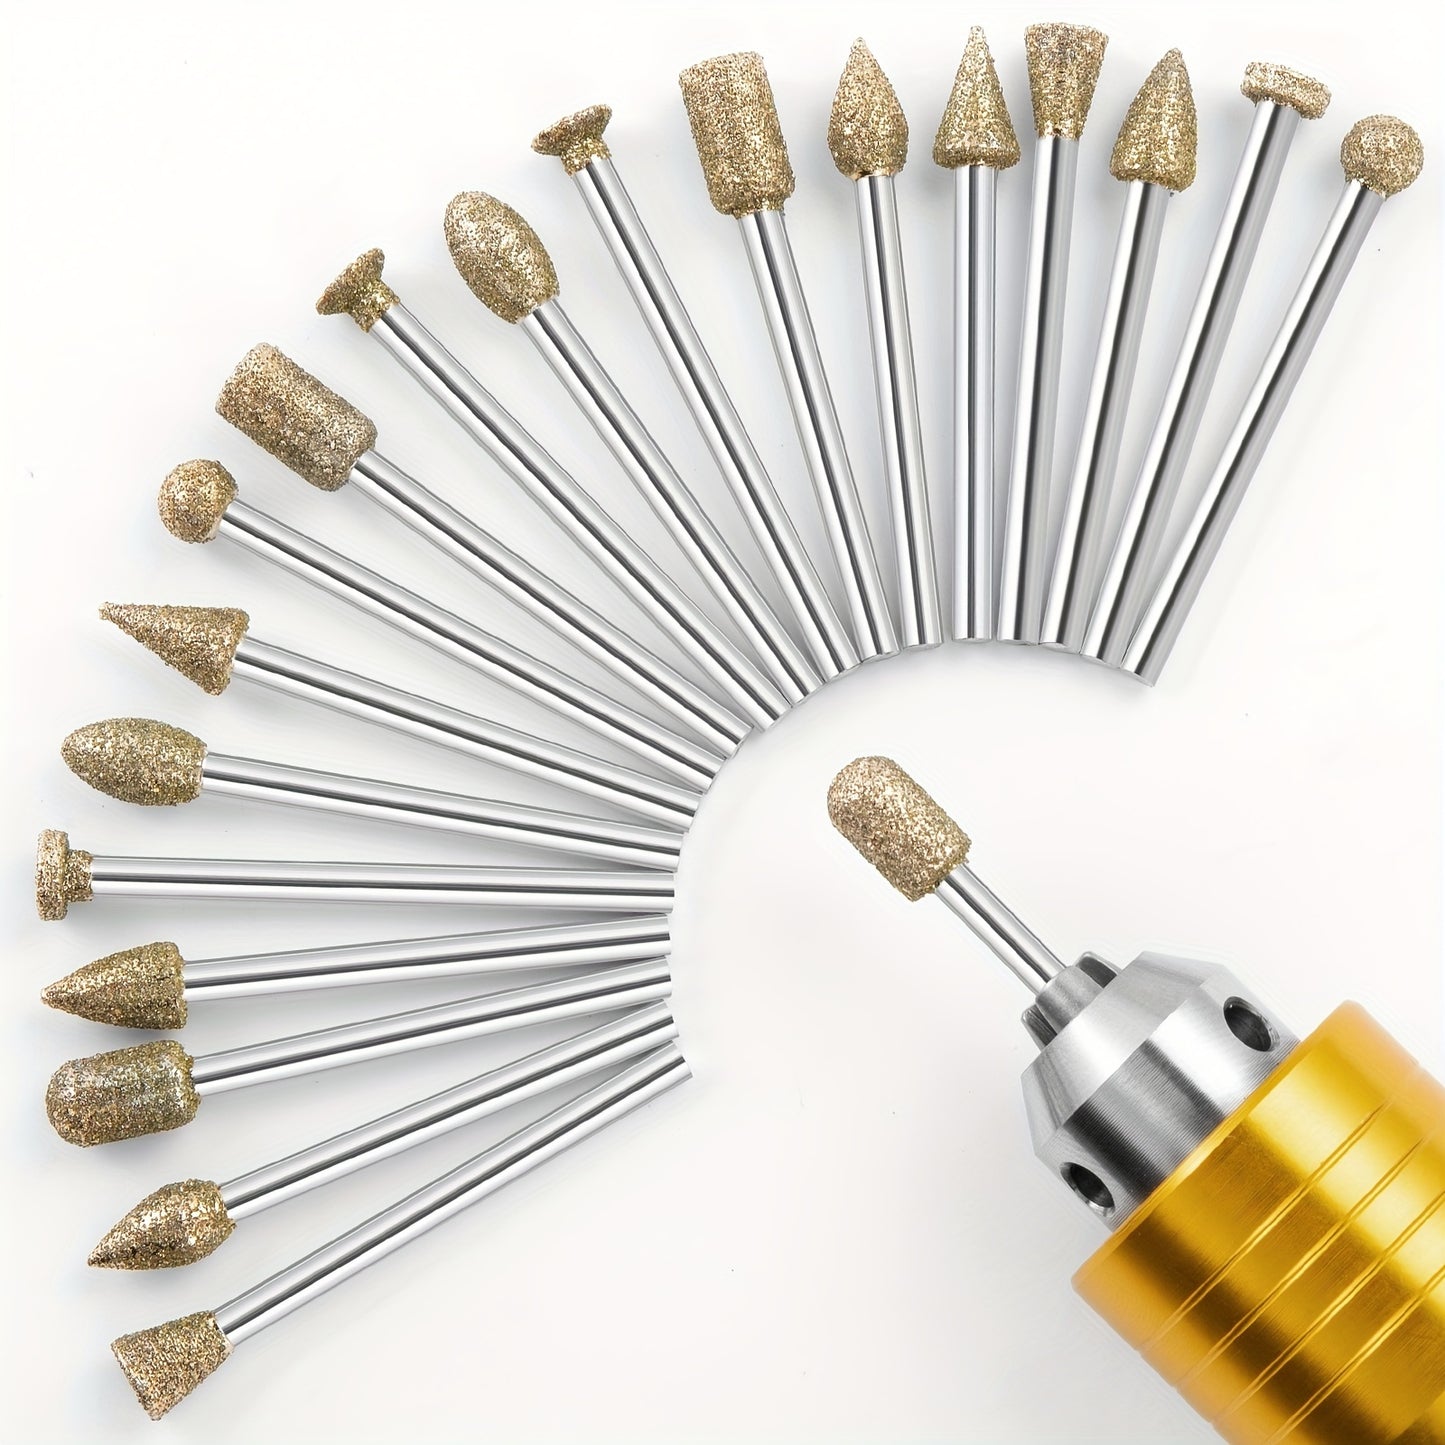 20pcs Diamond Grinding Burr Drill Bit Set, Rotary Tool Accessories Stone Carving Set With 1/8 Inch Shank For Stone Ceramic Glass Carving, Grinding, Polishing, Carving, Sanding